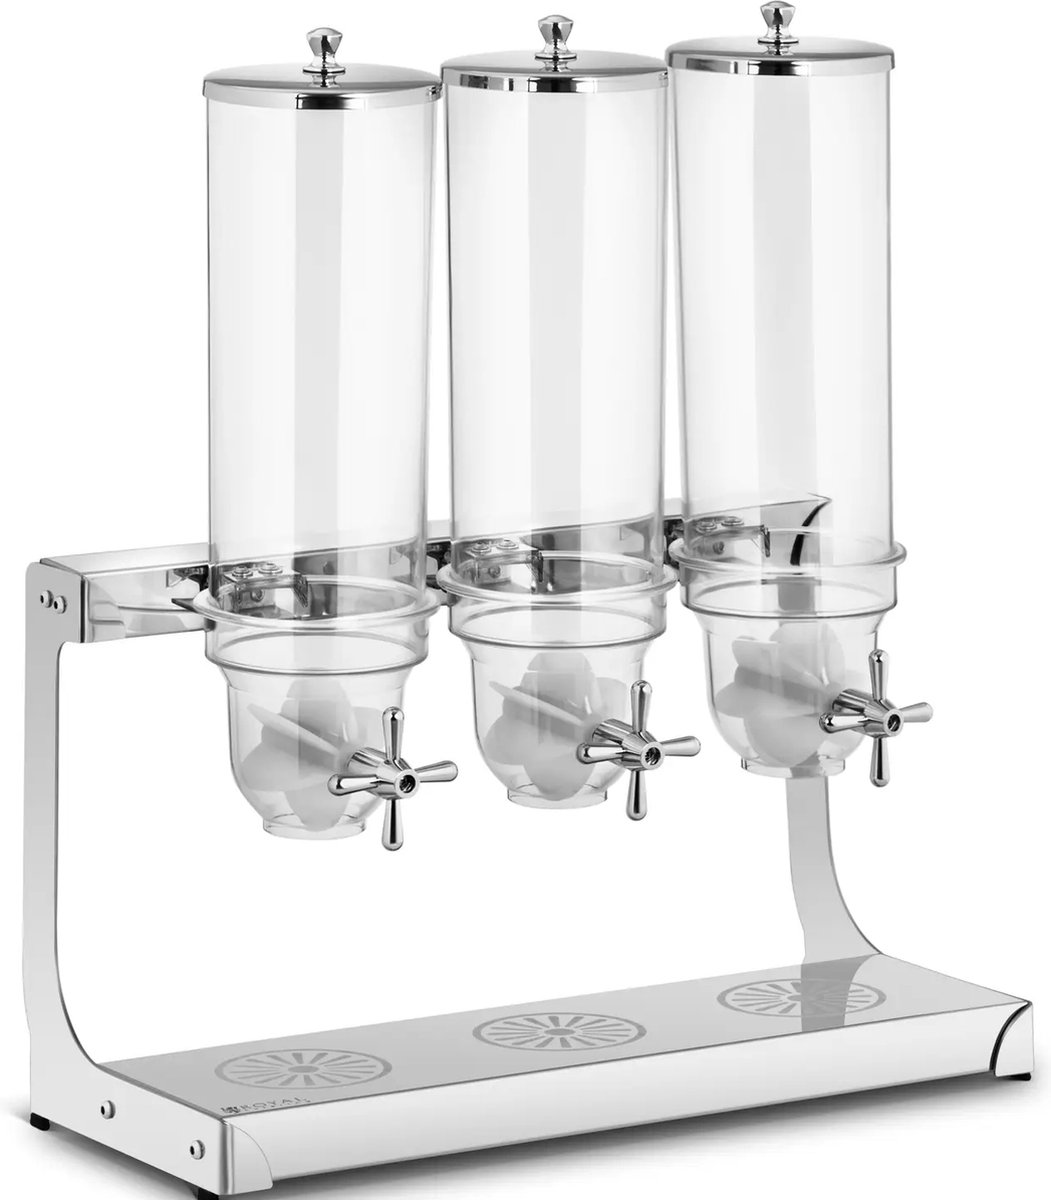 Royal Catering Granen Dispenser - 3 x 3.5 L - 3 containers